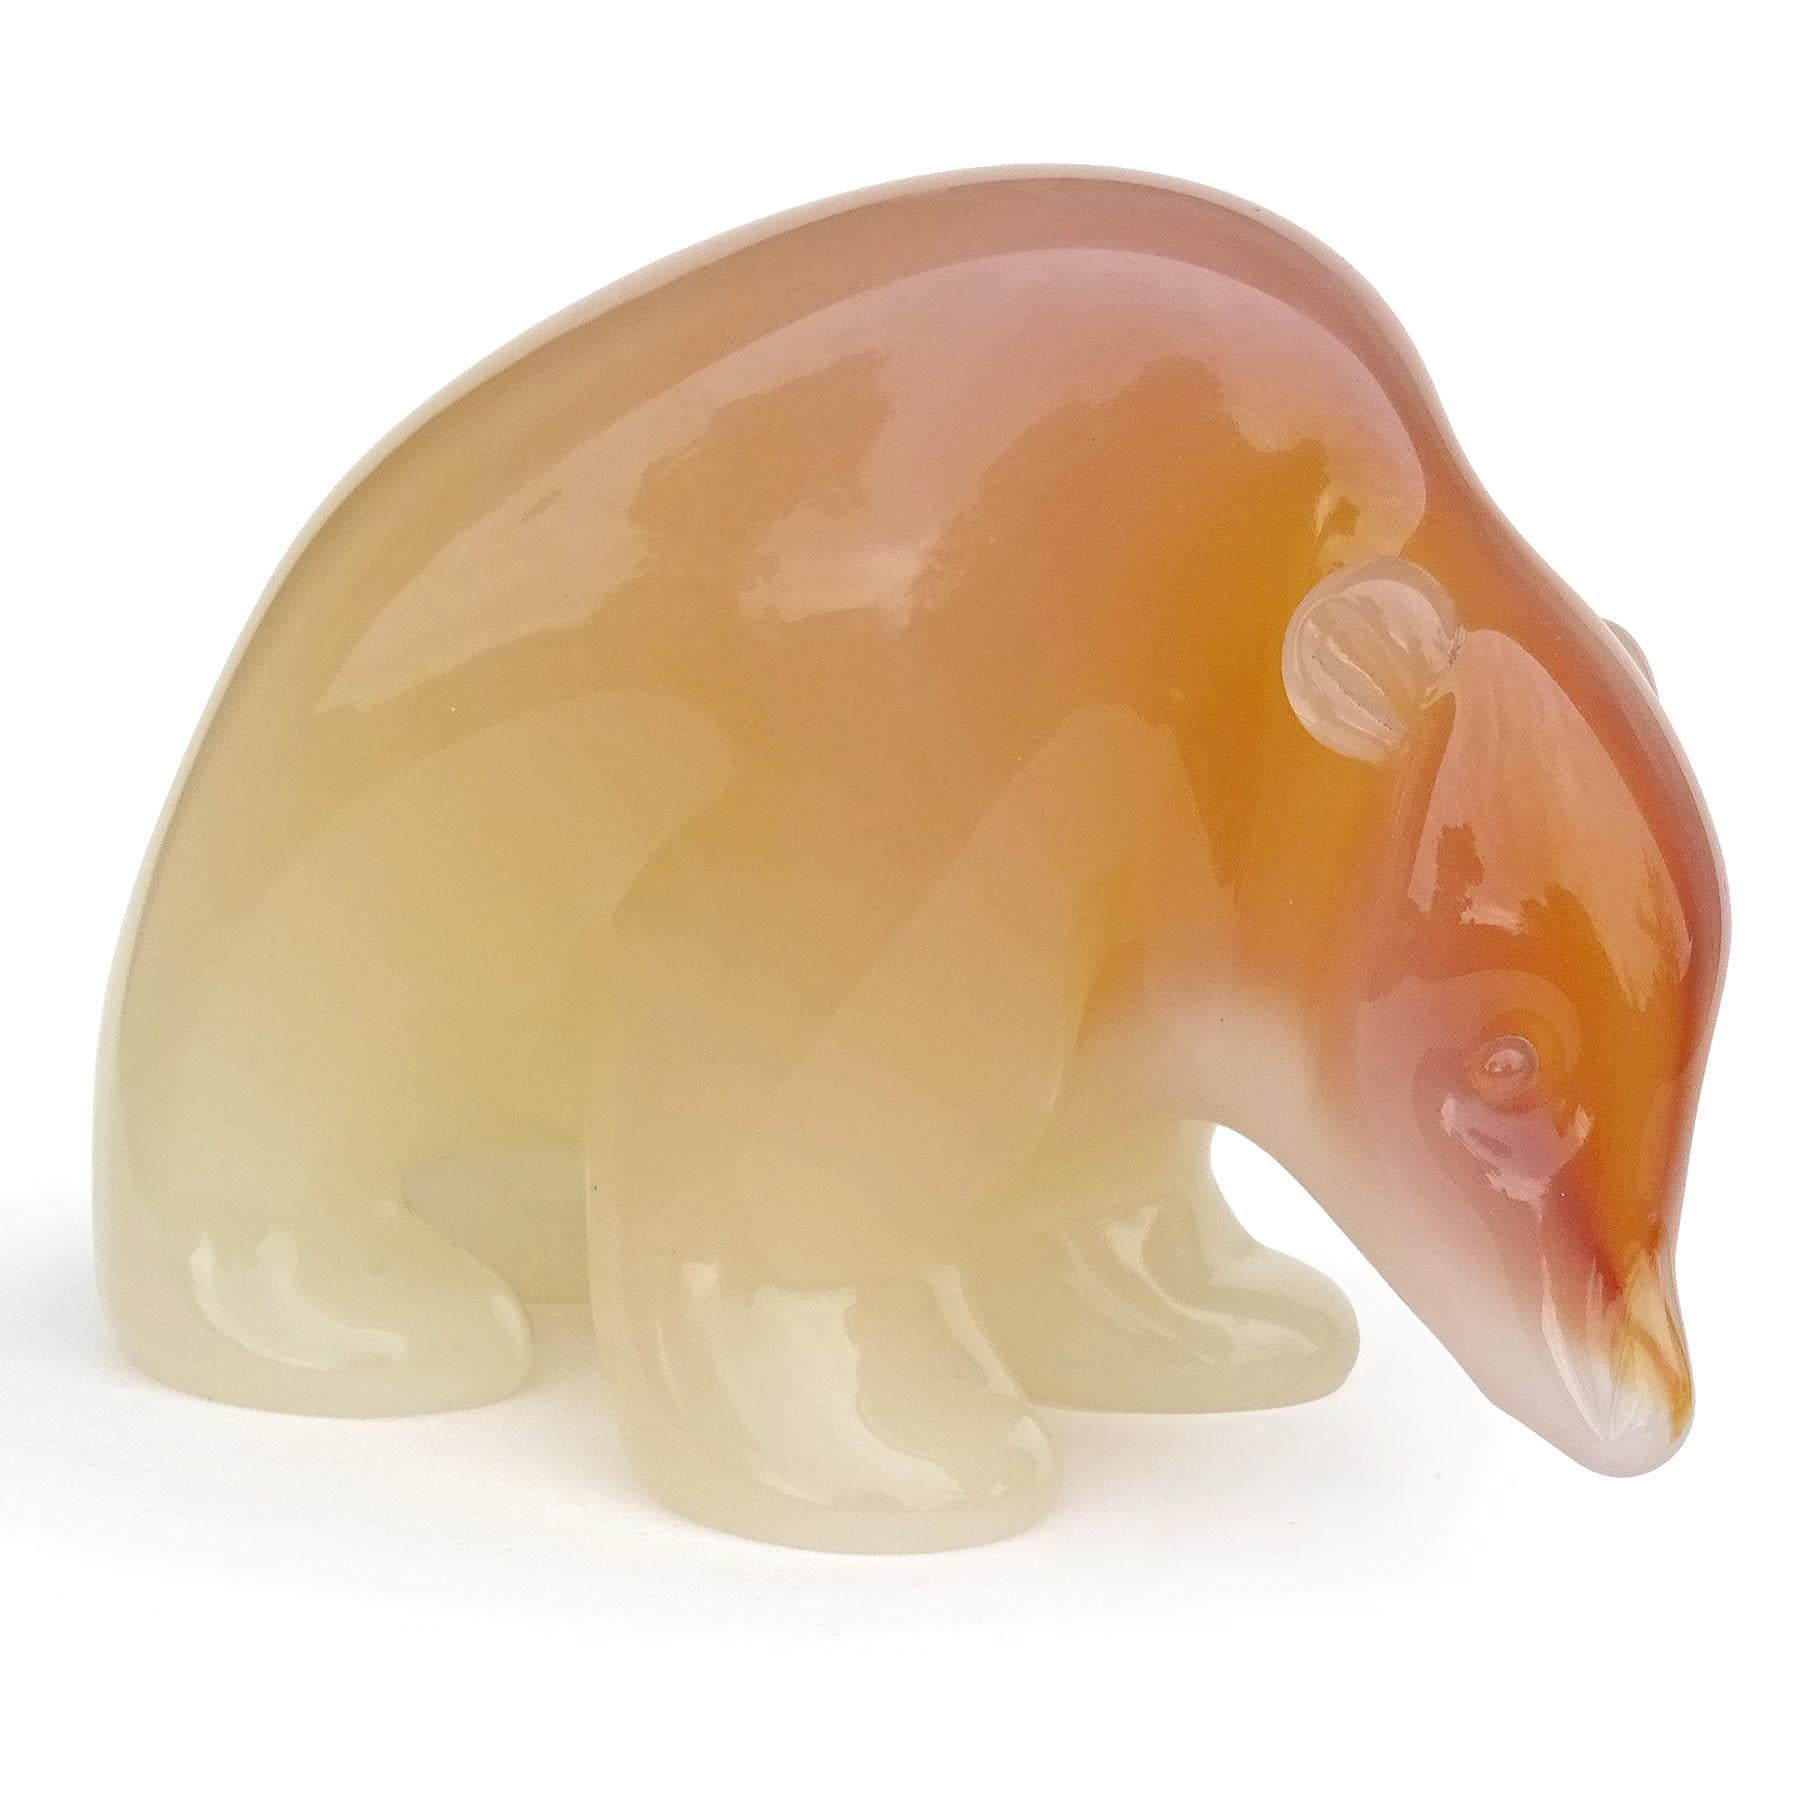 Beautiful, and large, vintage Murano hand blown orange and white opalescent Italian art glass bear sculpture / figure. Documented to designer Archimede Seguso. The bear is nicely sculpted with very realistic features, including little eyes and ears.